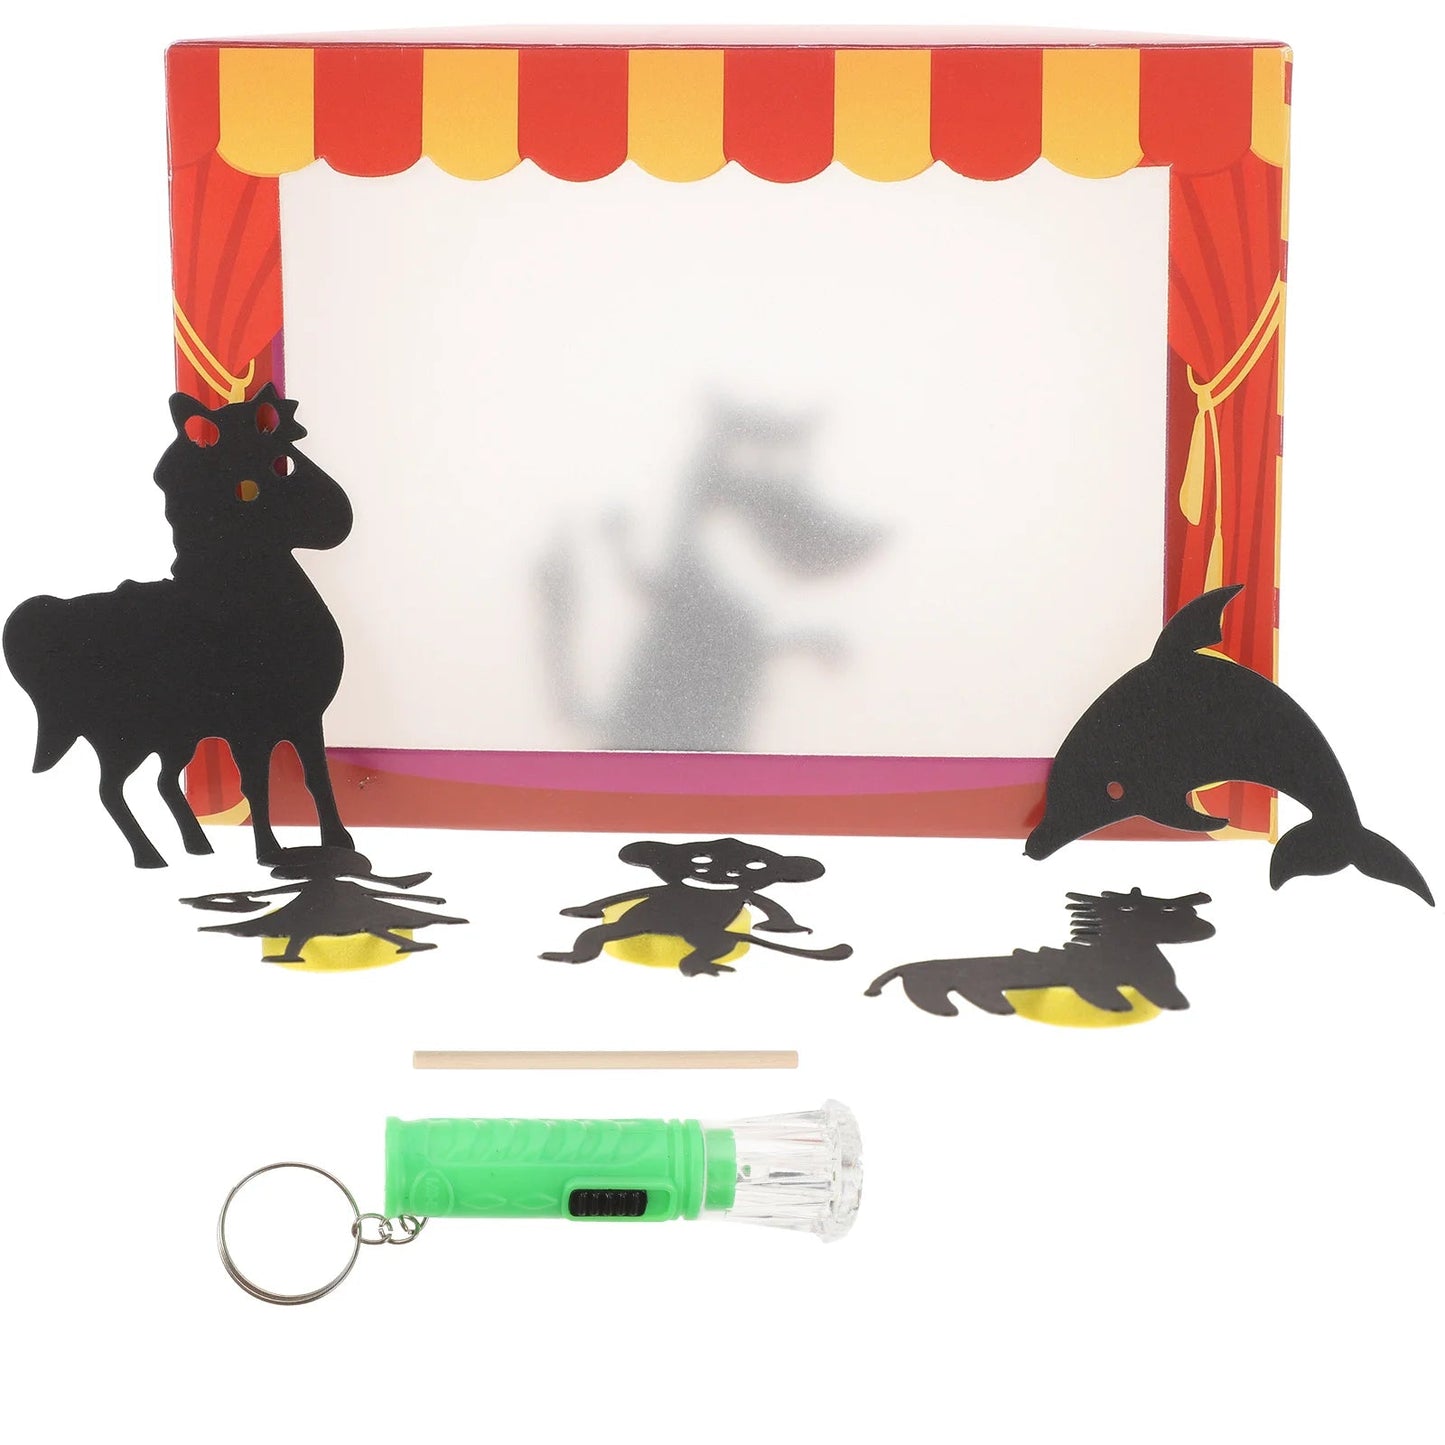 Chinese Shadow Puppetry Kit - Handmade Educational Toy for Kids - ToylandEU